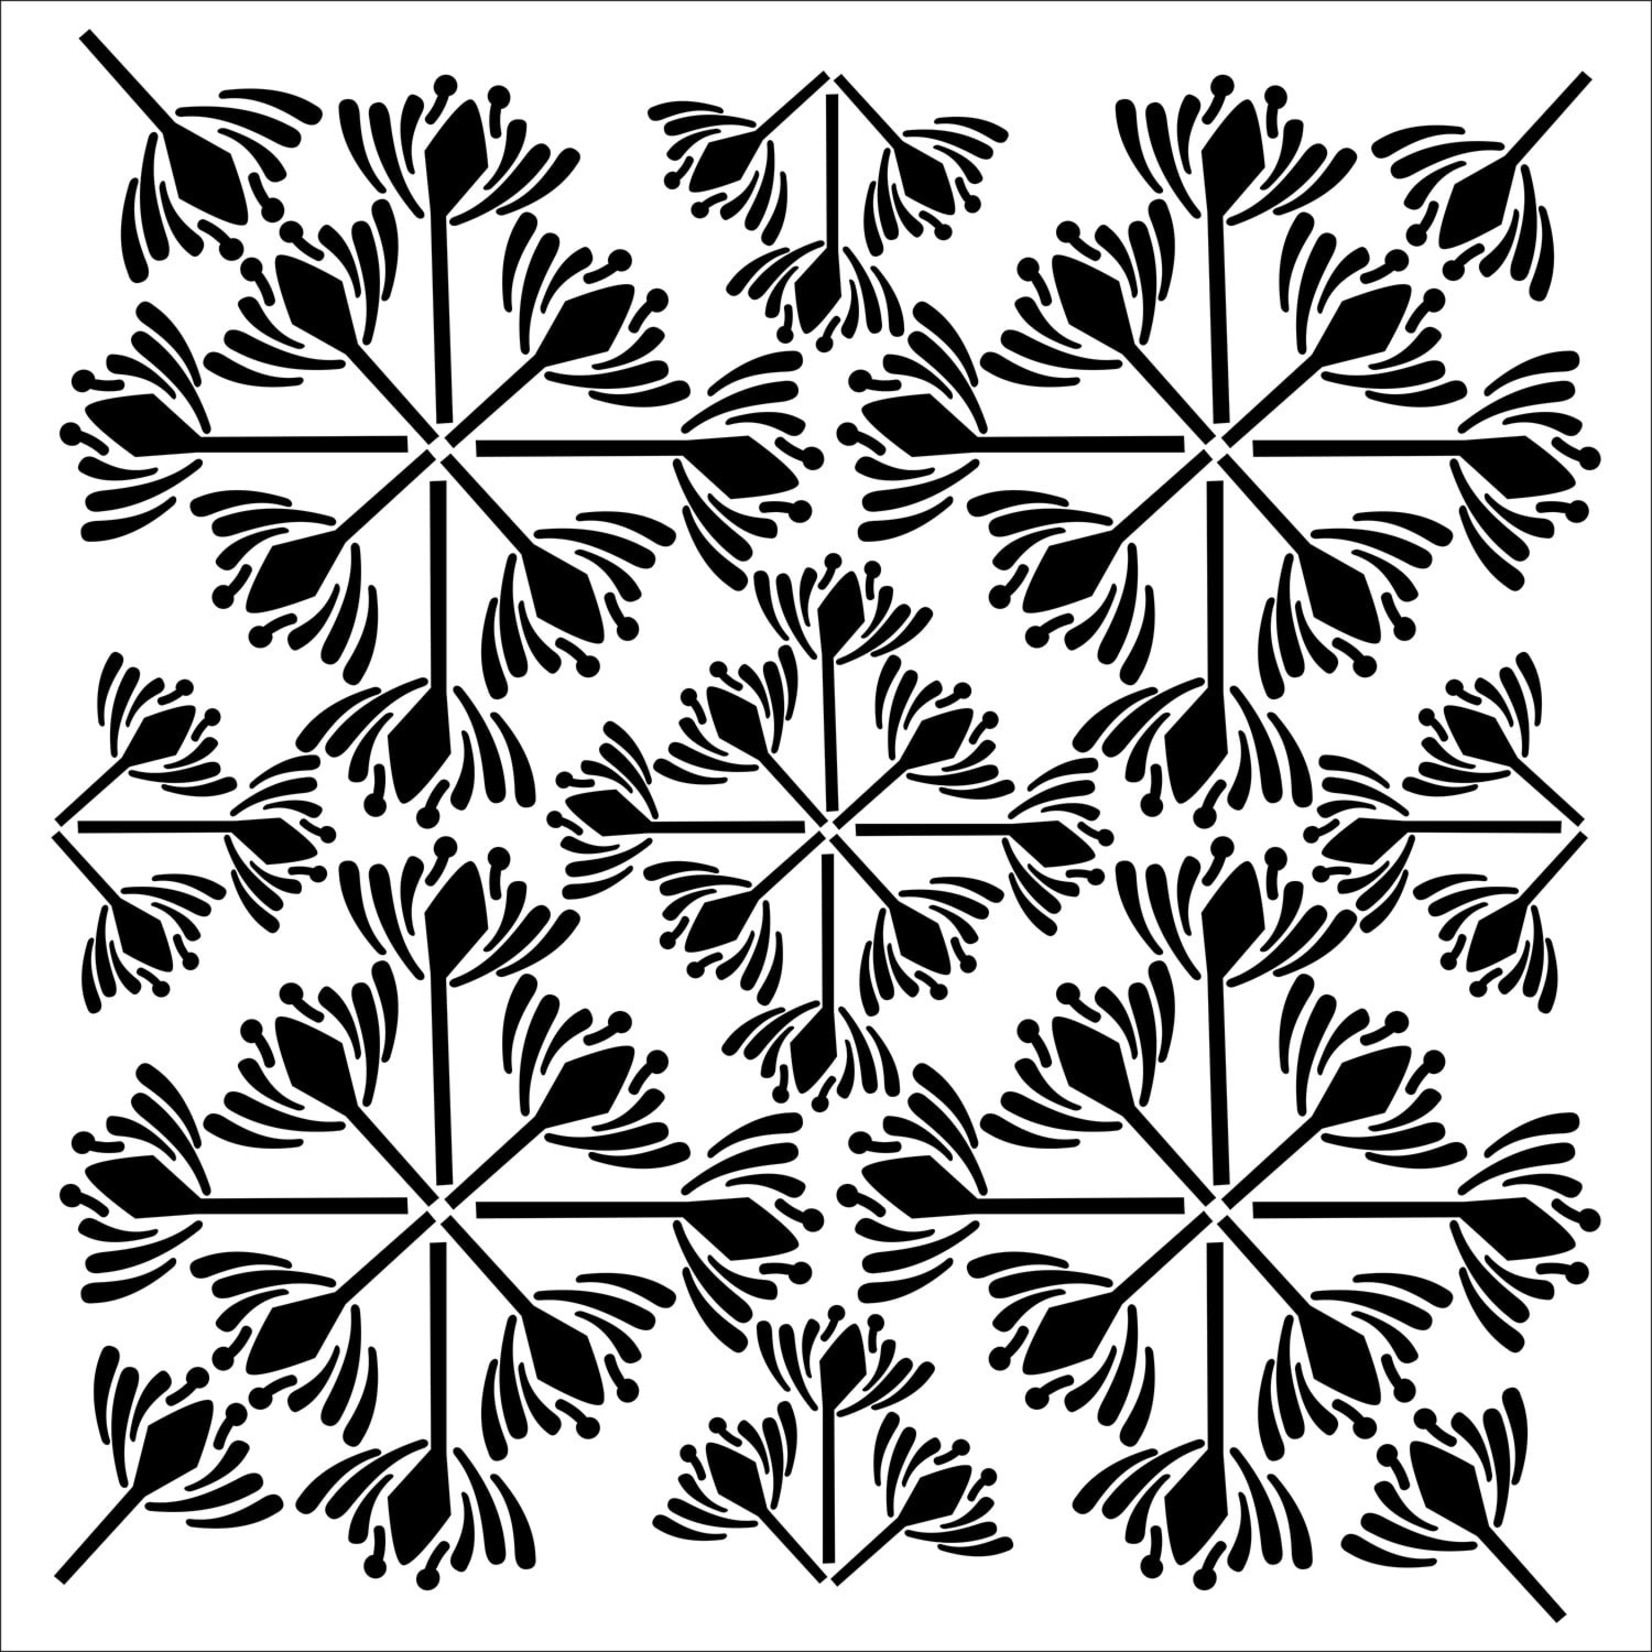 THE CRAFTERS WORKSHOP STENCIL 6X6 TCW943S MINI GARDEN TILE